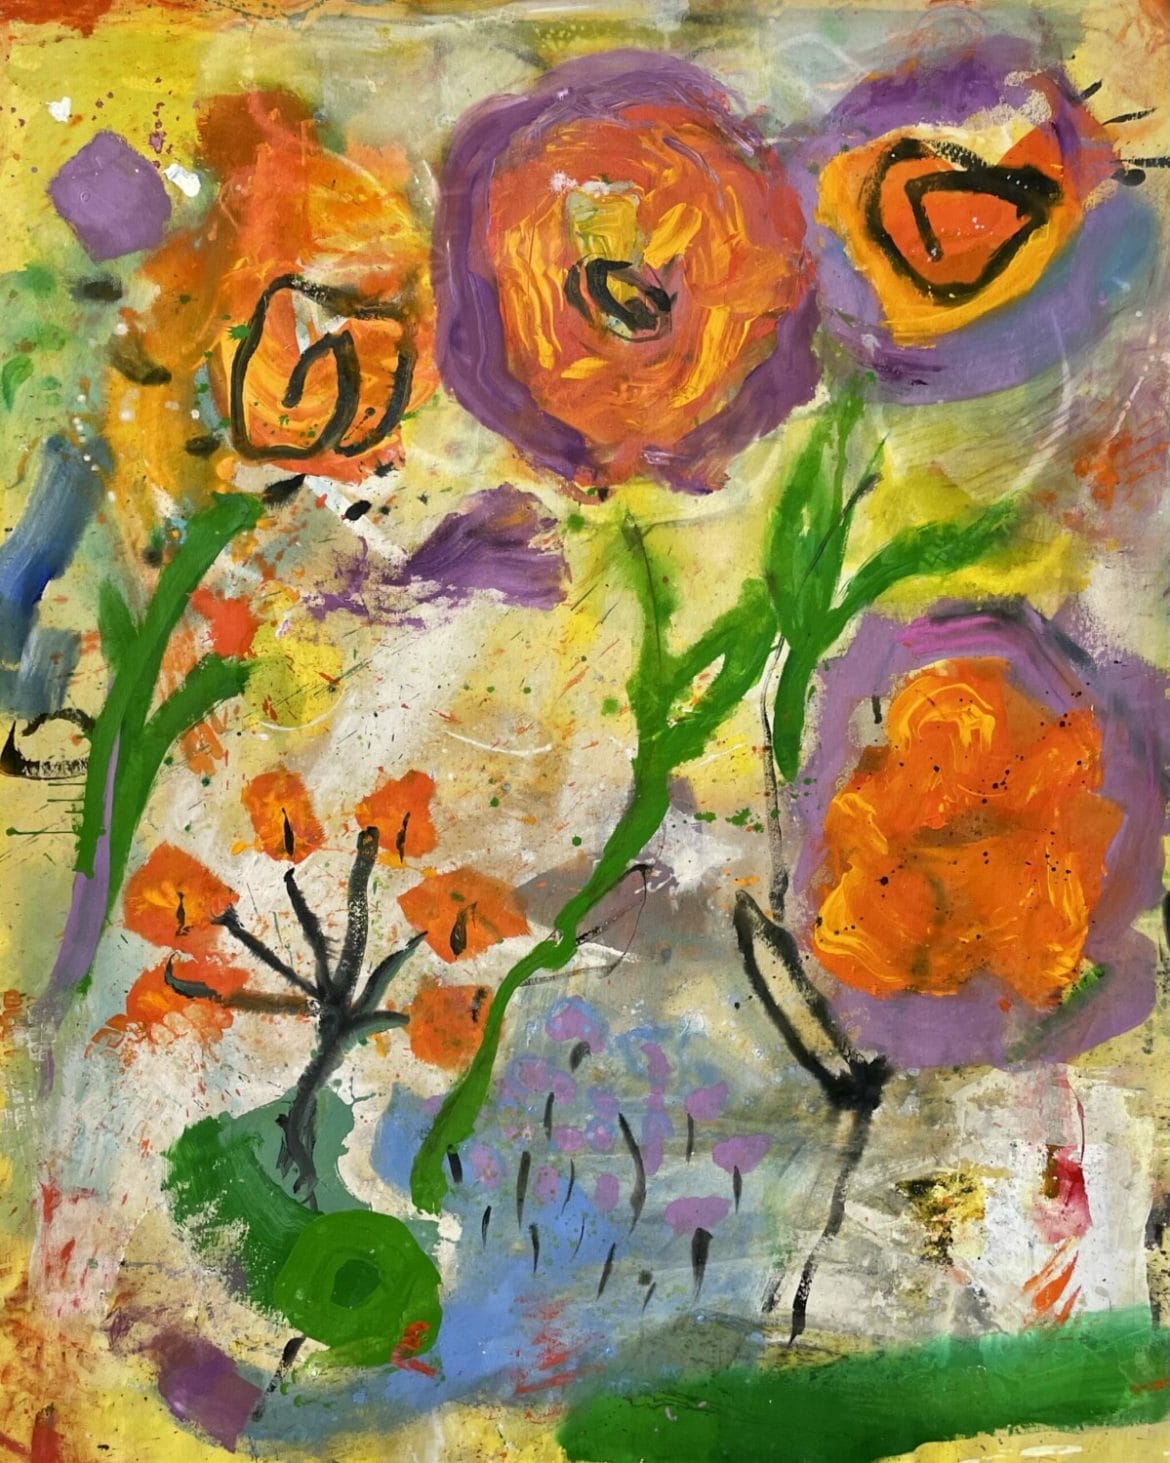 JANE BOOTH Orange Poppies Acrylic, Sumi Ink, Graphite Spray Paint, Watercolor Crayons on Canvas 78 x 64 inches